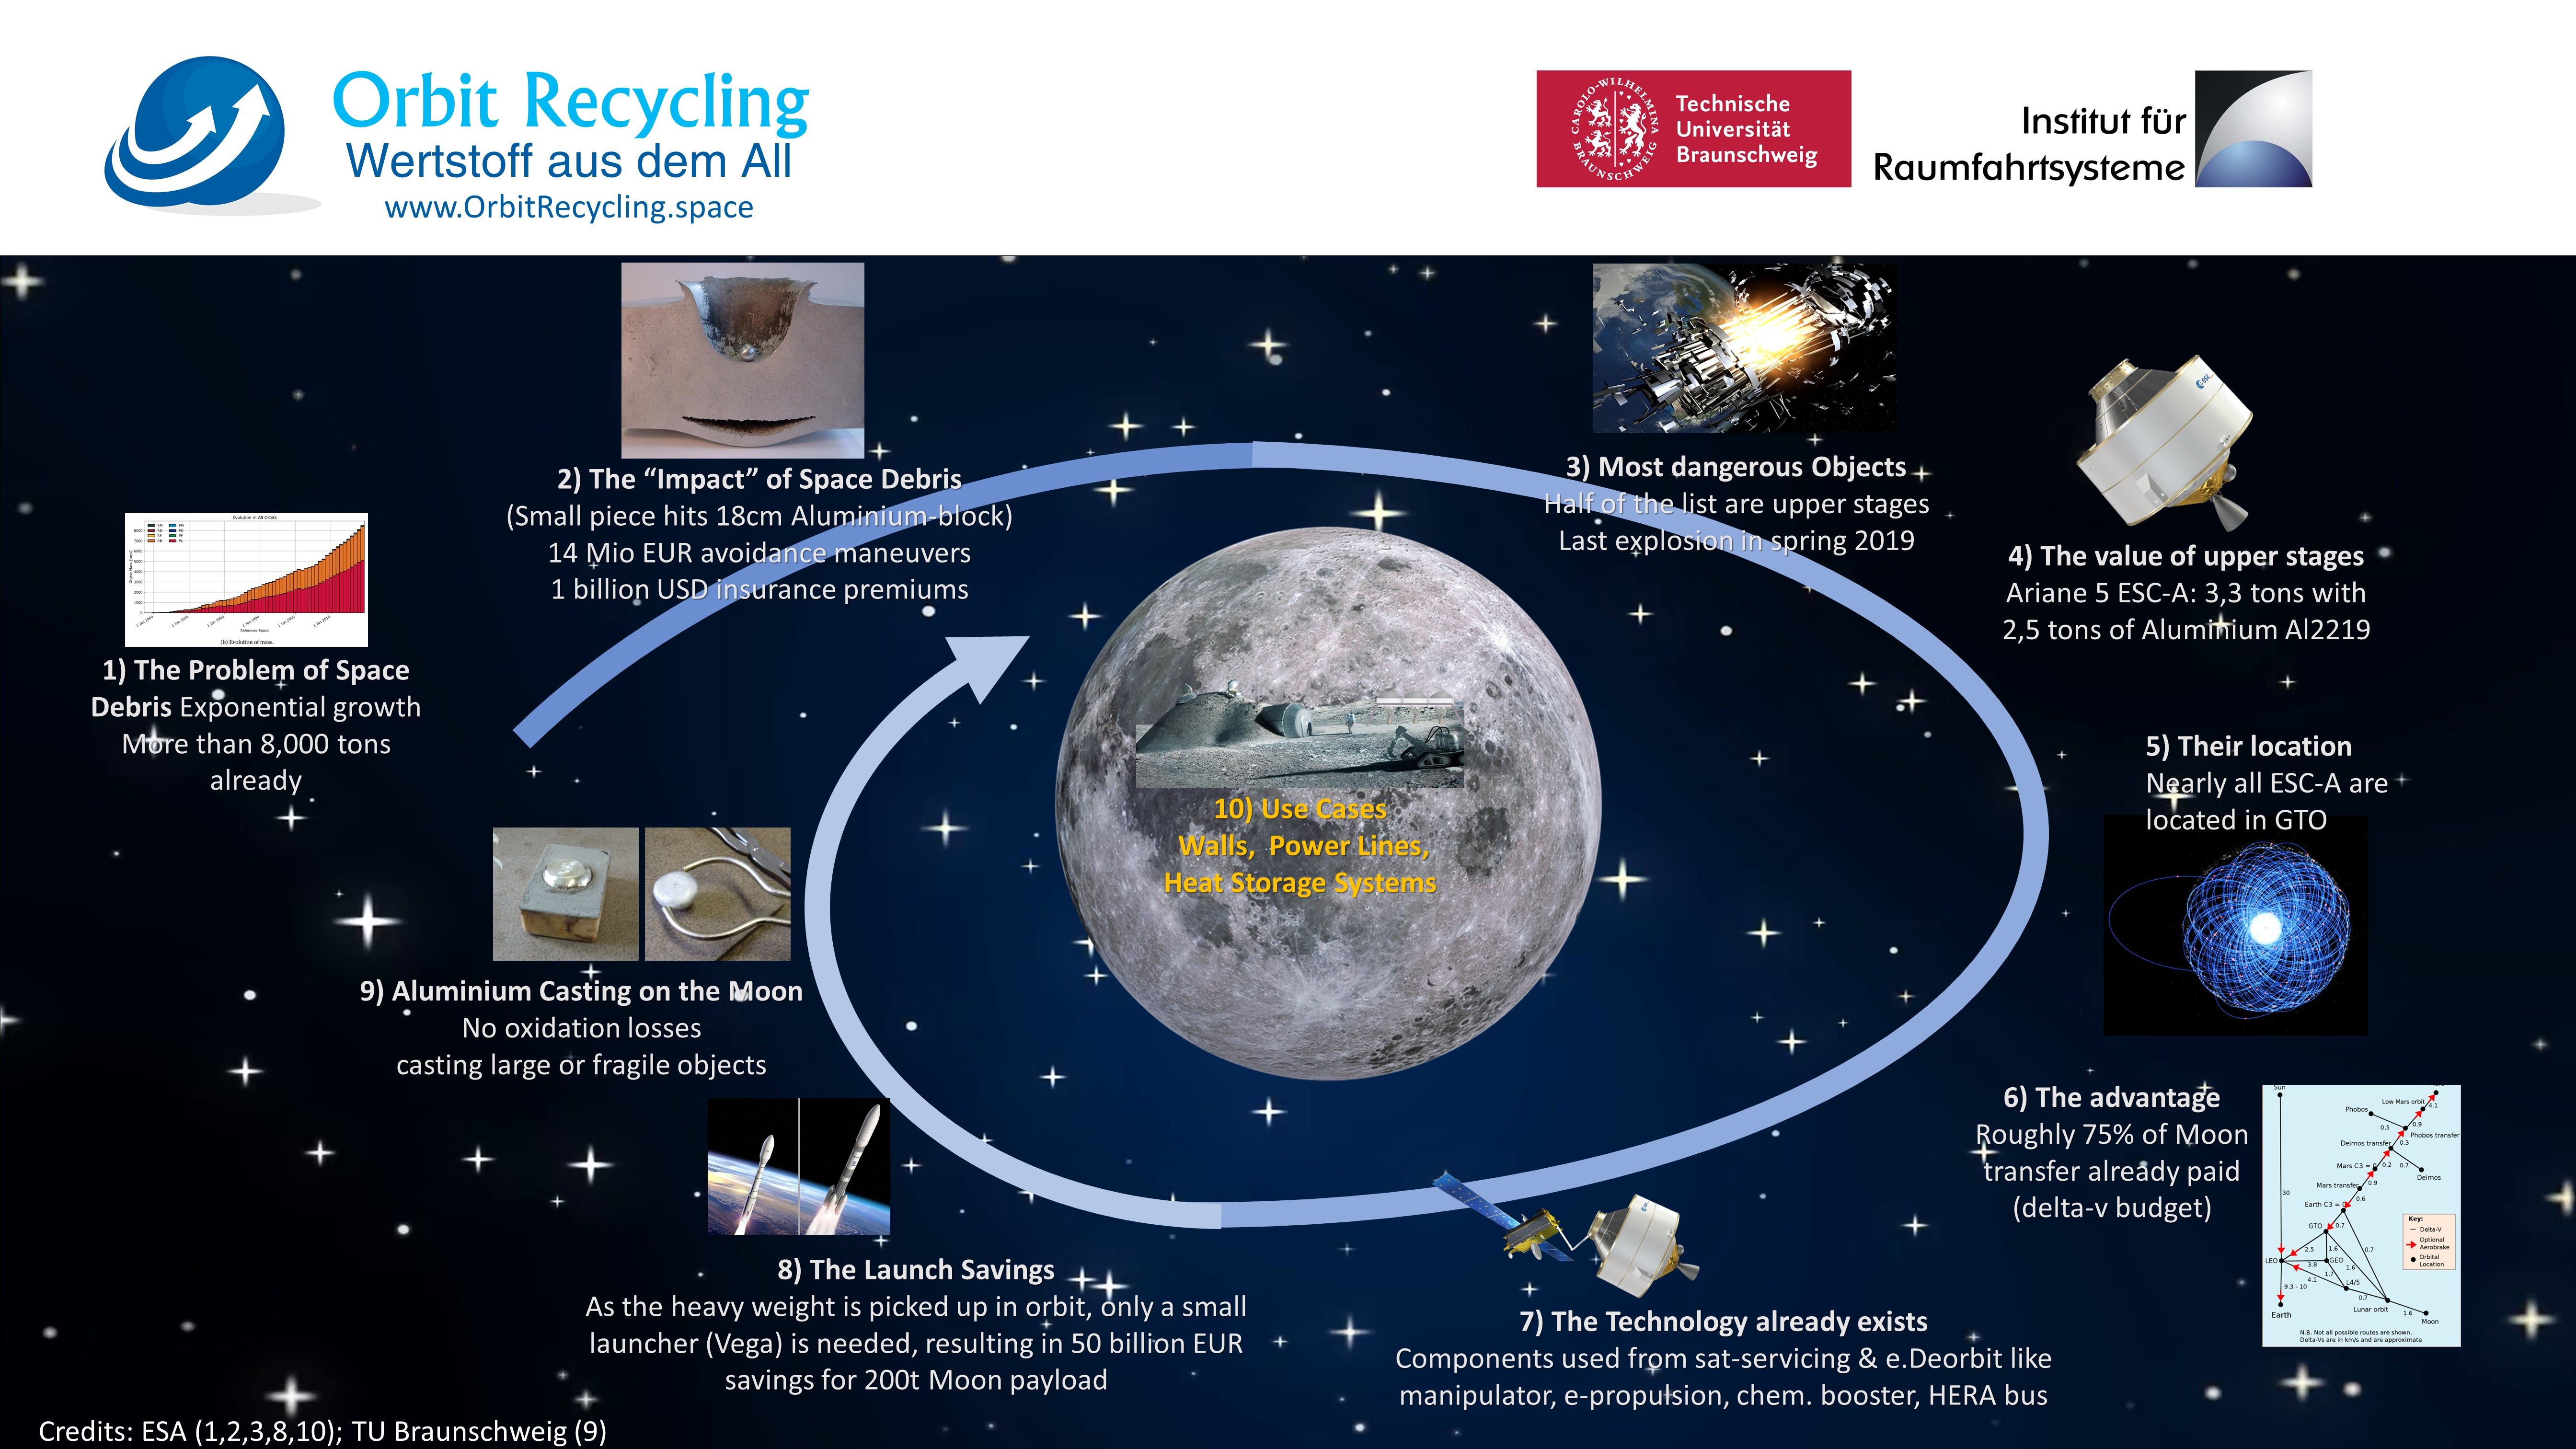 Combining ISRU and Space Debris for Constructions on the Moon